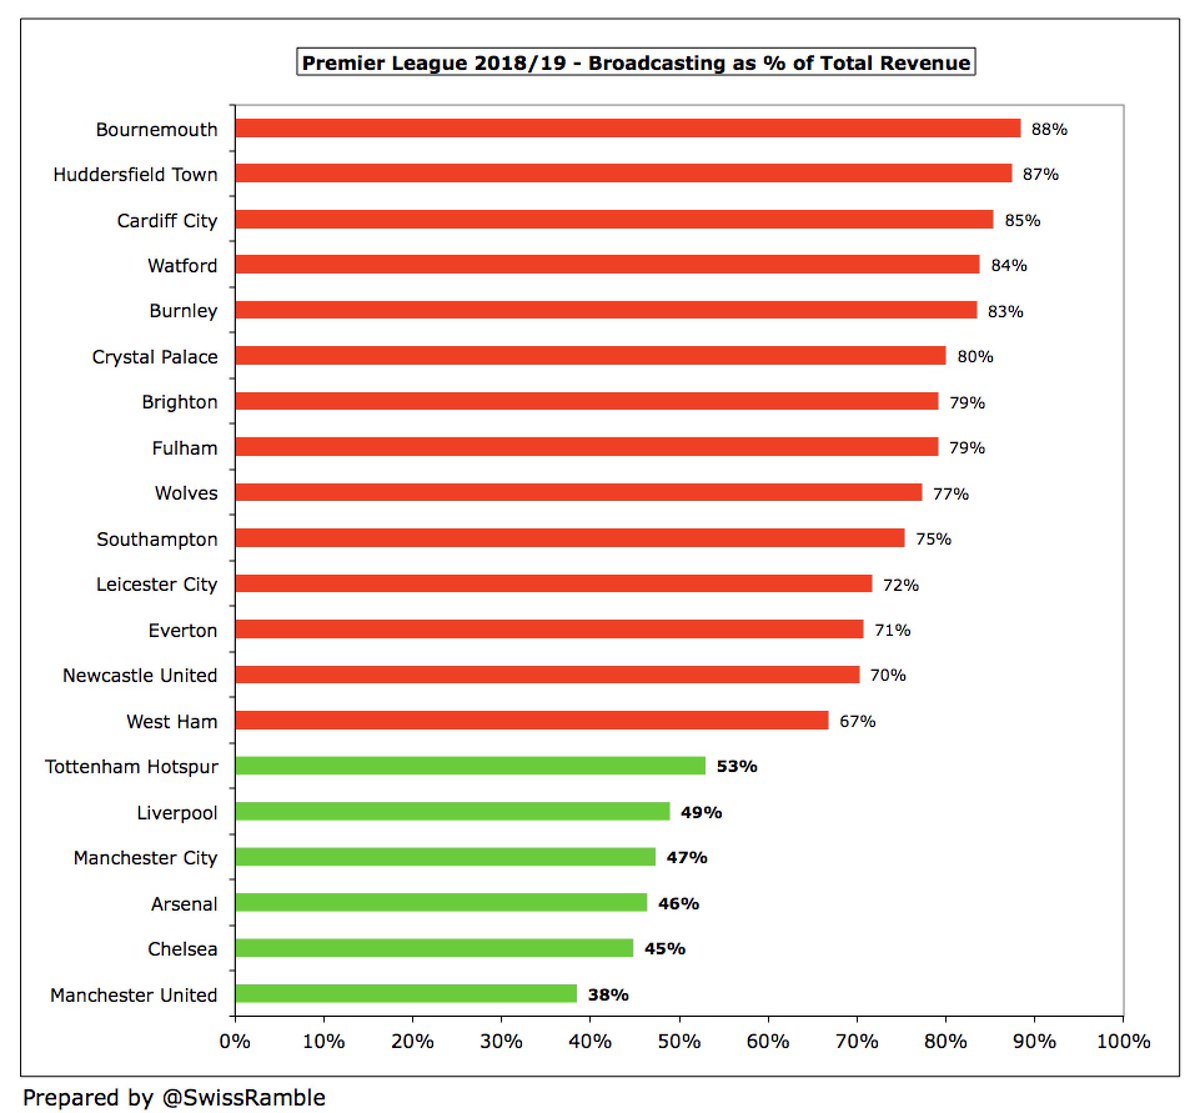 It is little wonder that other clubs reacted so badly, as the Super League could have had a tremendous impact on their revenue, e.g. lower Premier League TV deal if the clubs were expelled. Those clubs outside the Big Six earn between 67% and 88% from broadcasting.